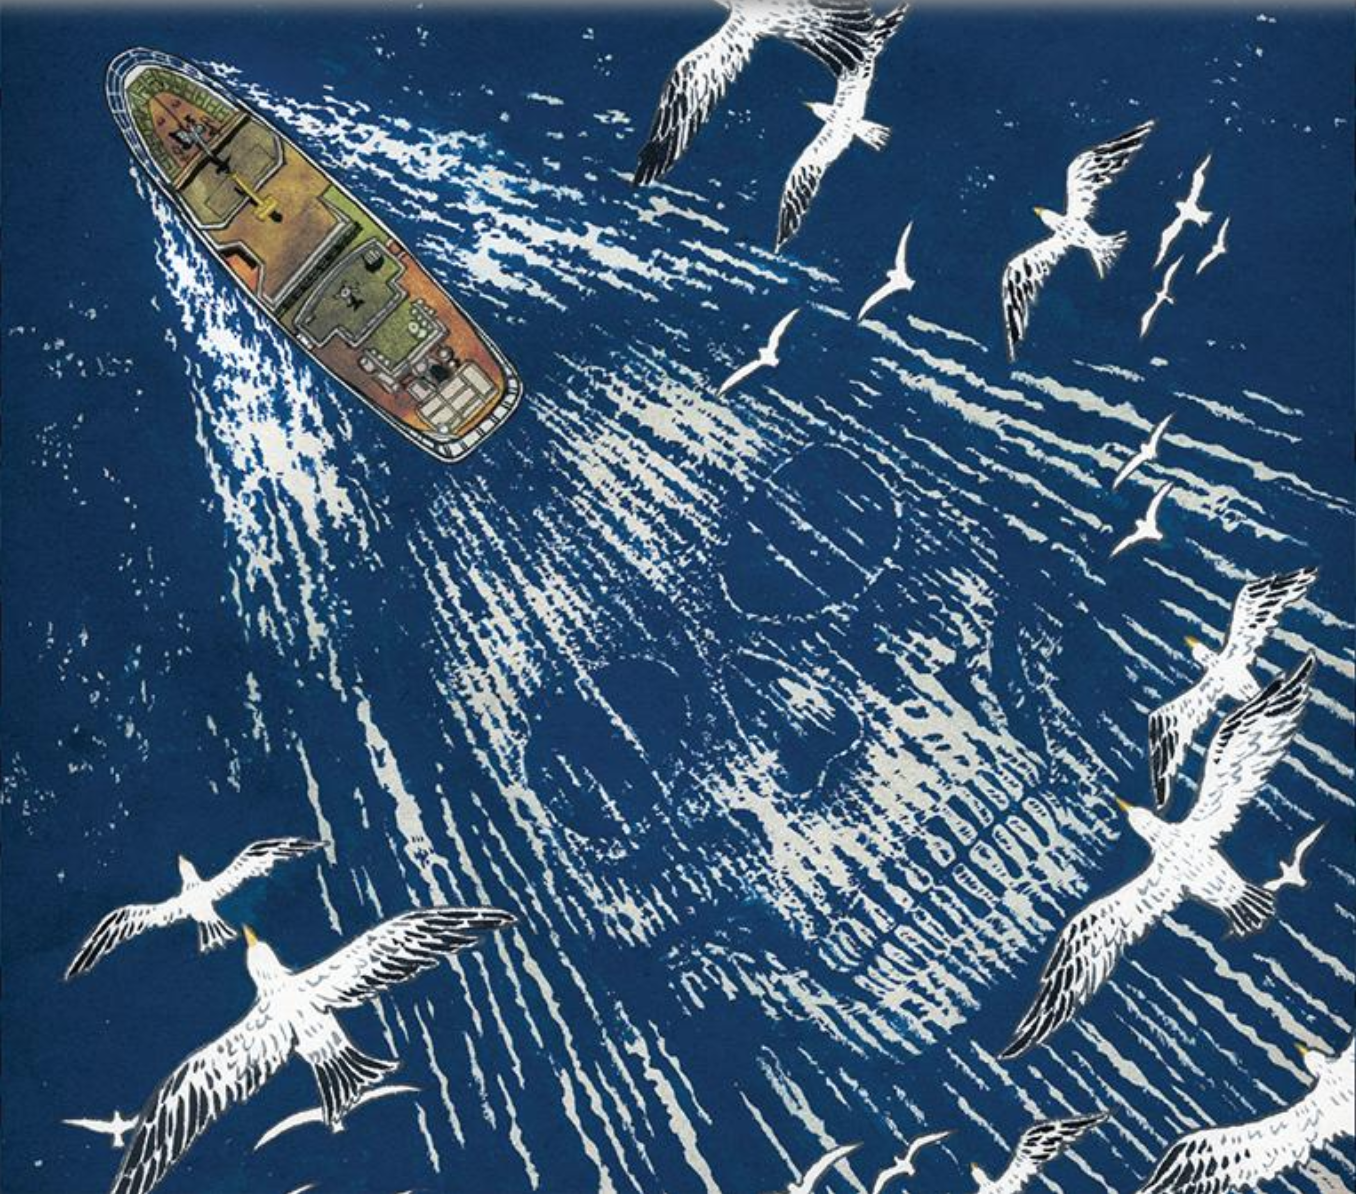 The rusted pirate fishing vessel STS-50 evaded authorities time and time again—until its luck ran out. Illustration by Yuko Shimizu.